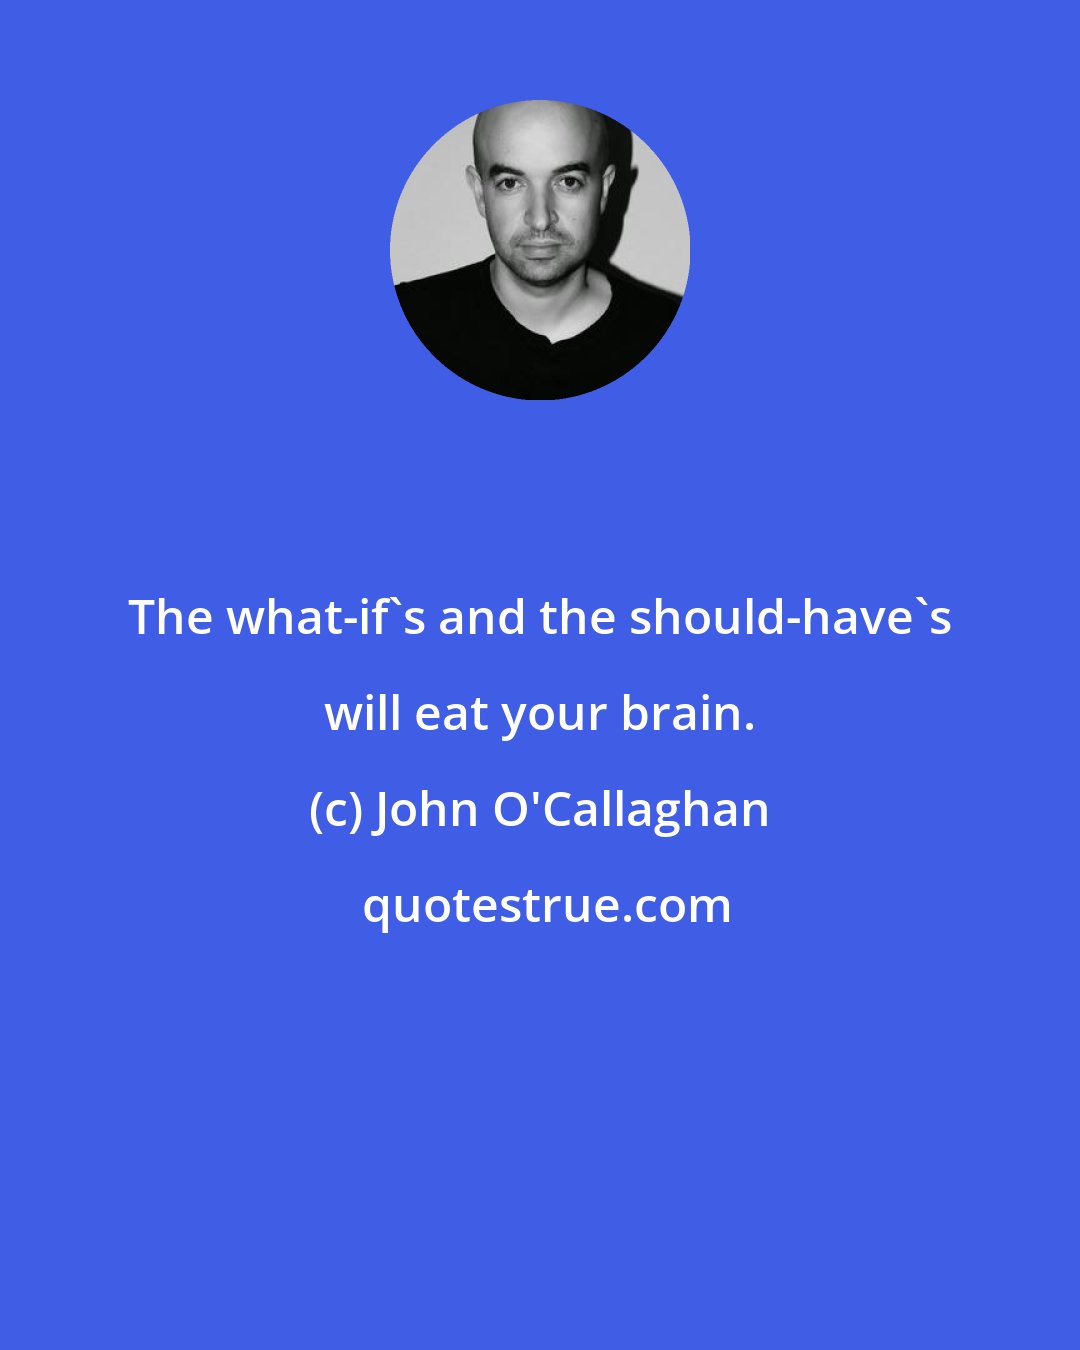 John O'Callaghan: The what-if's and the should-have's will eat your brain.